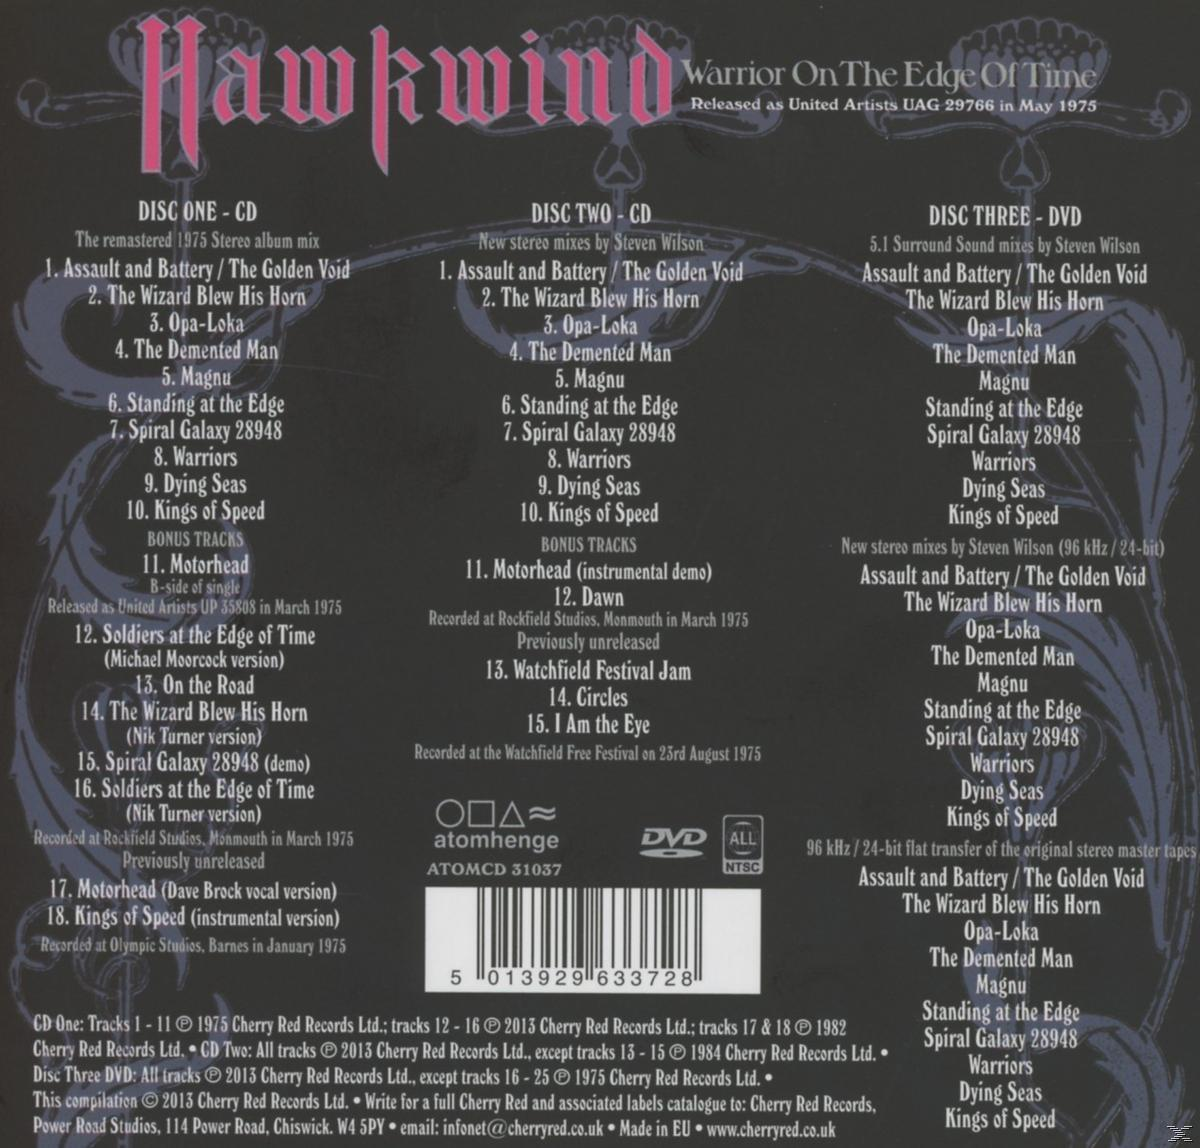 On DVD + - The (CD (Deluxe Edge Hawkwind Edition) - Time Video) Warrior Of